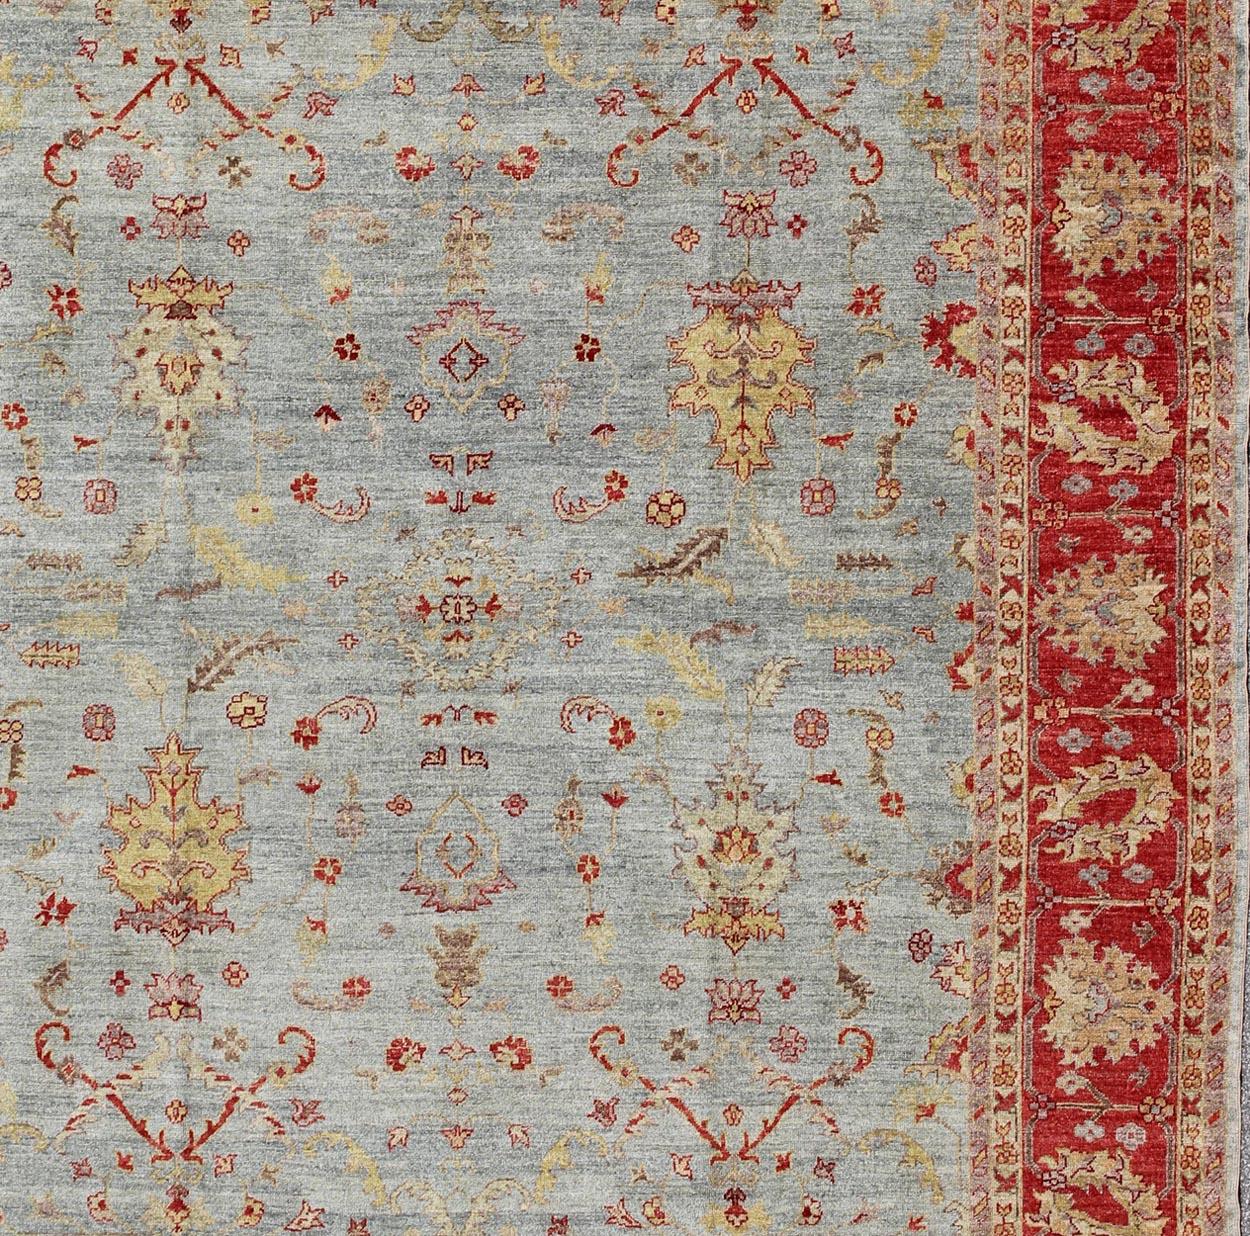 Angora Turkish Oushak Rug in Raspberry Red, Light Blue, Light Green & Butter. Angora collection is the finest Oushak reproductions. Keivan Woven Arts/ Rug/AN-113926, Reproduction Angora Oushak.

Measures:12'4 x 13'11    

From our Angora Collection,